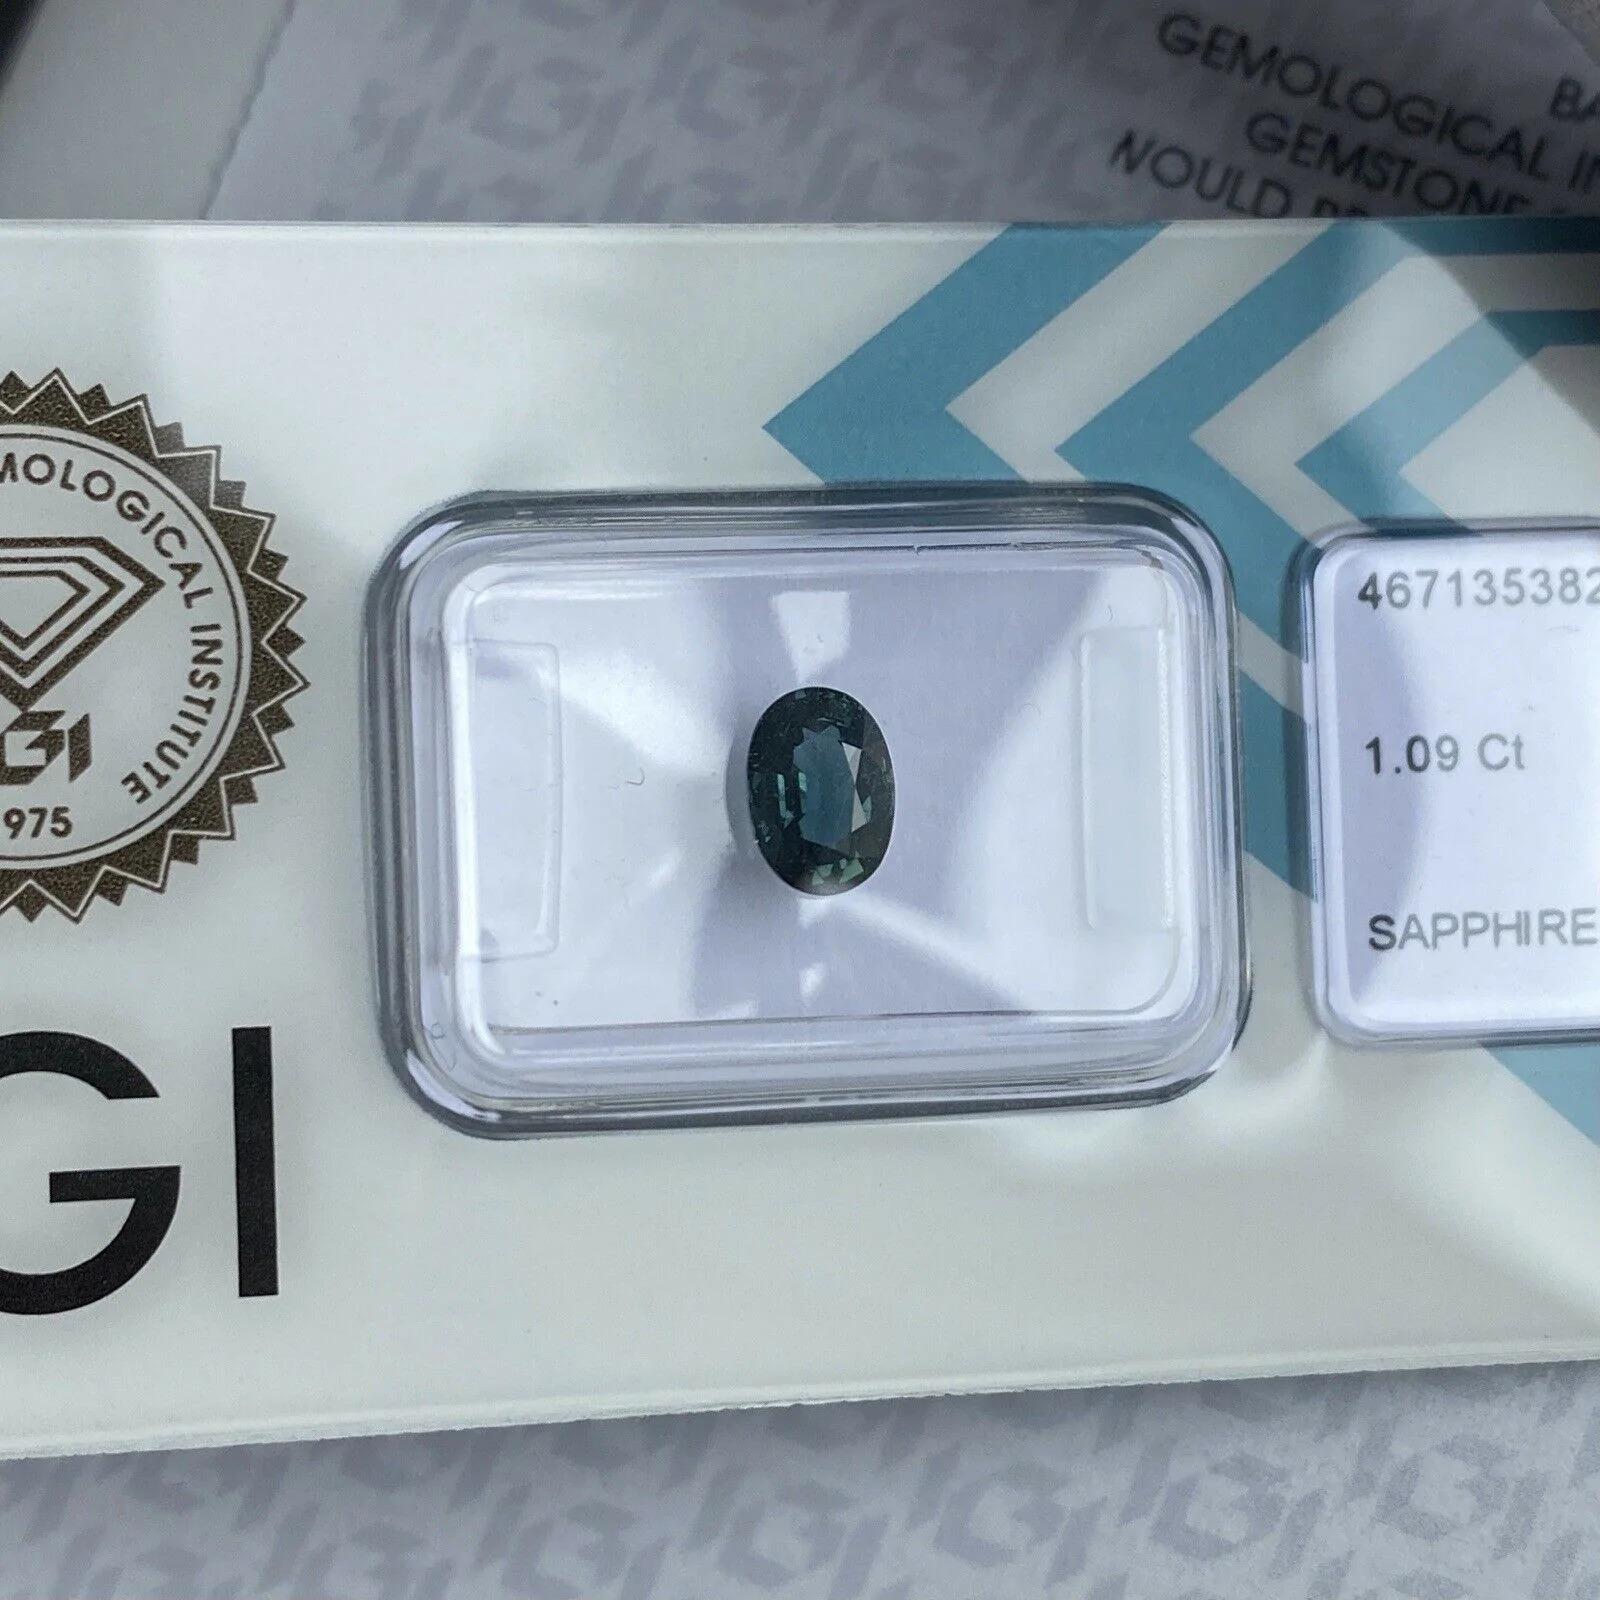 Australian 1.09ct Untreated Deep Green Blue Teal Sapphire Oval Cut IGI Certified

Deep Green Blue ‘Teal’ Untreated Sapphire In IGI Blister. 
1.09 Carat with an excellent oval cut and excellent clarity, very clean stone with only some small natural